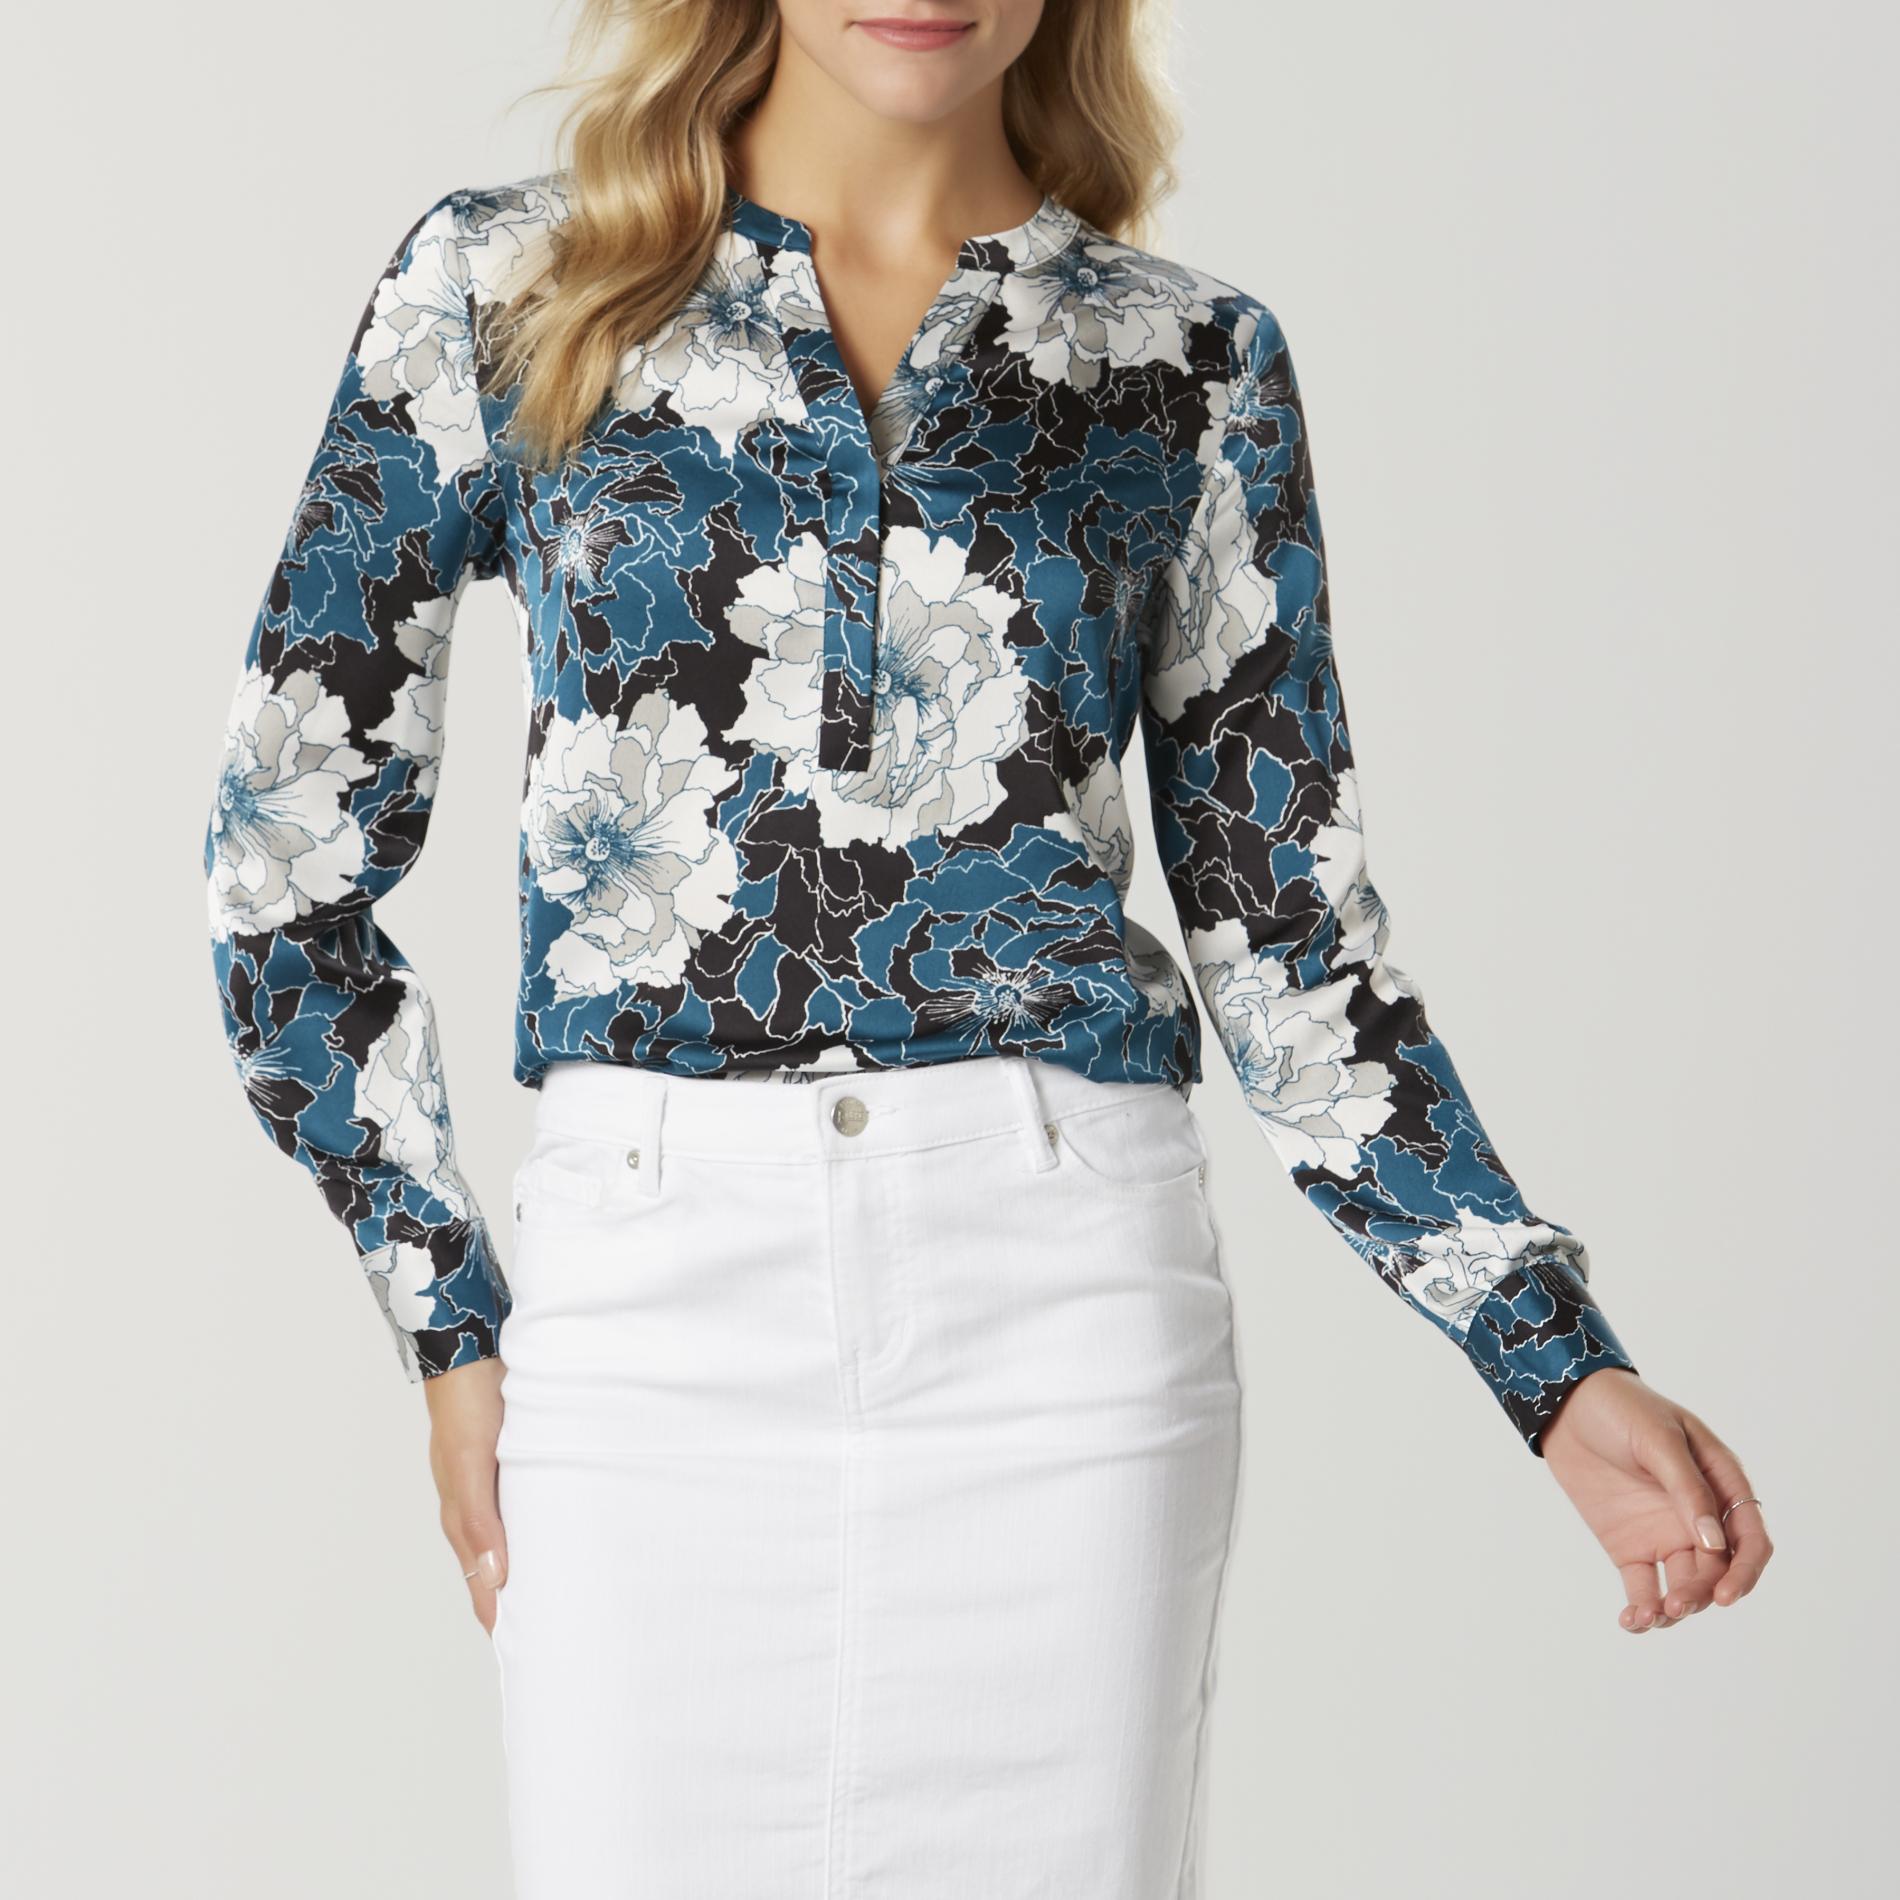 Simply Styled Women's Split Neck Blouse - Floral